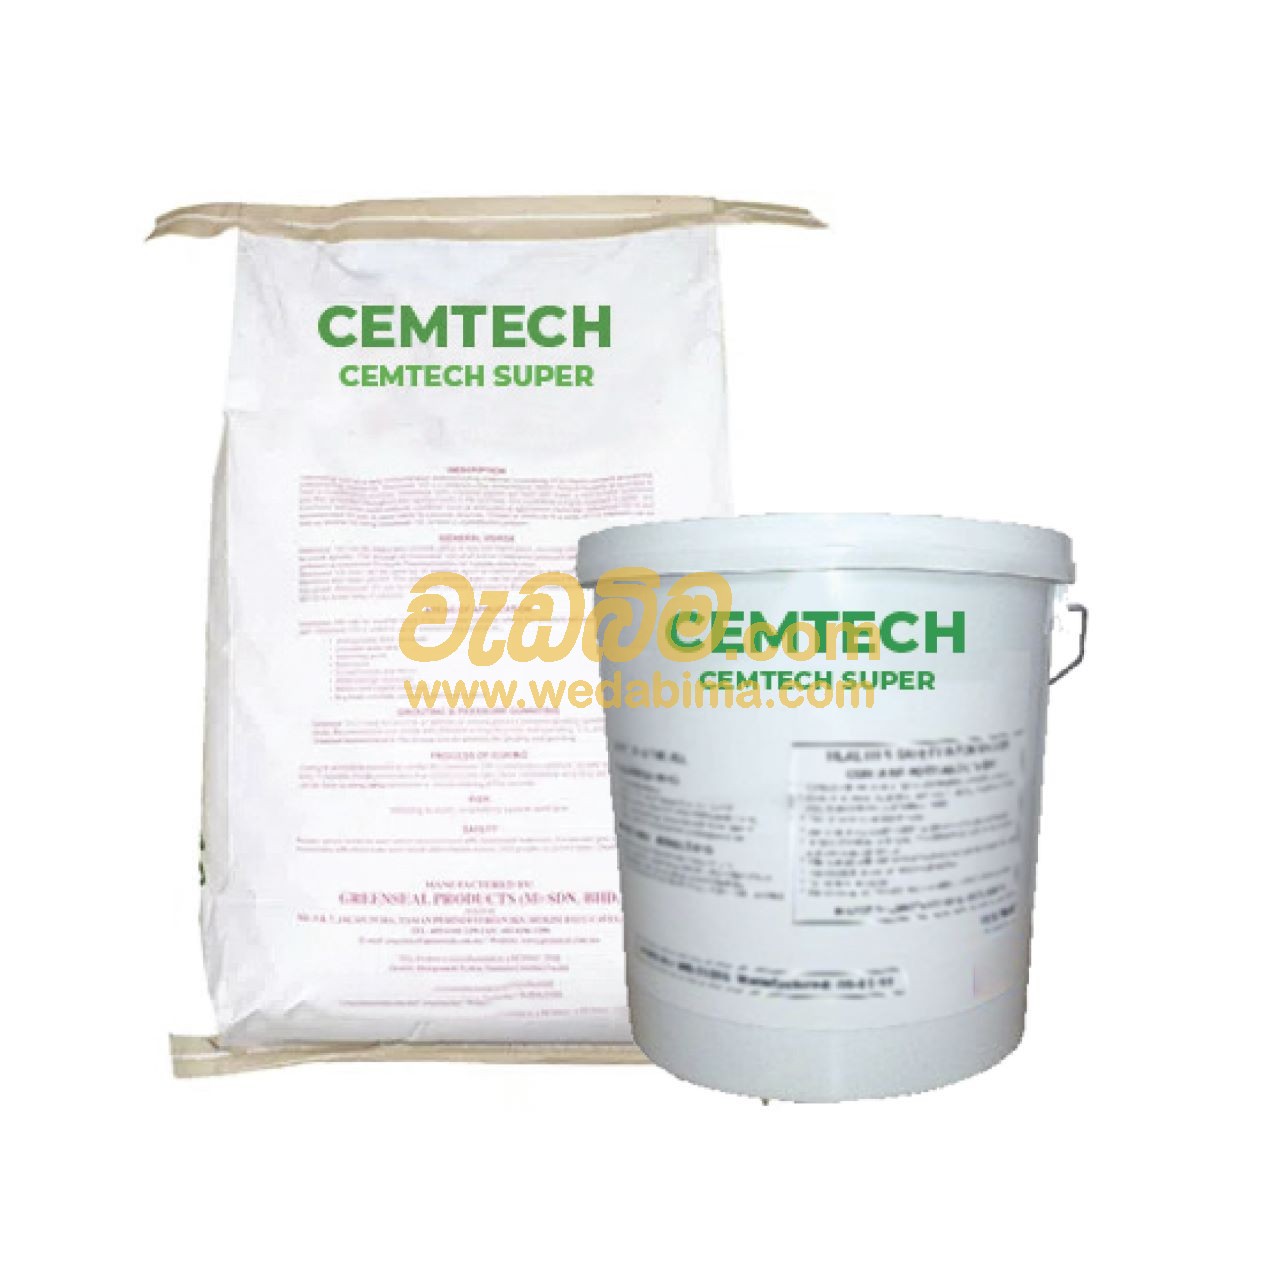 Cover image for Cristalistion waterproofing meterial for Basement, lift wells